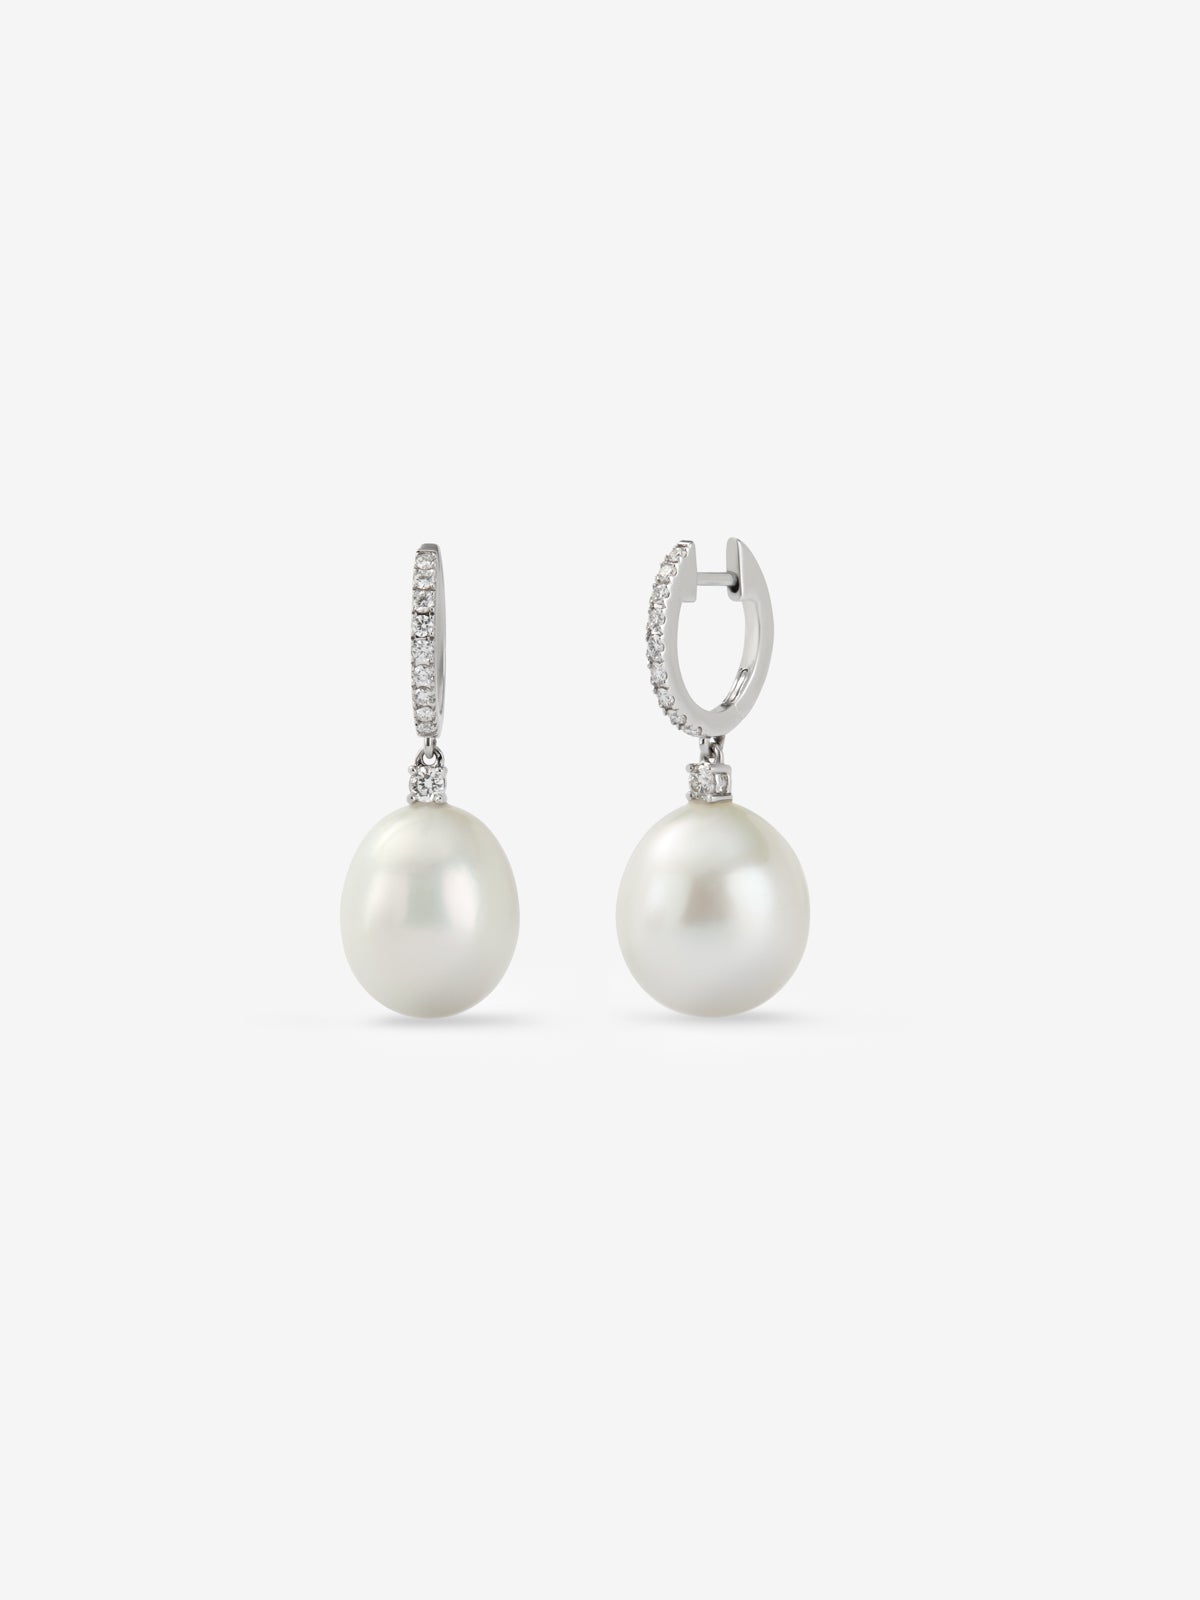 18K white gold earrings with 12.5mm pearls and 0.33 ct brilliant cut diamonds